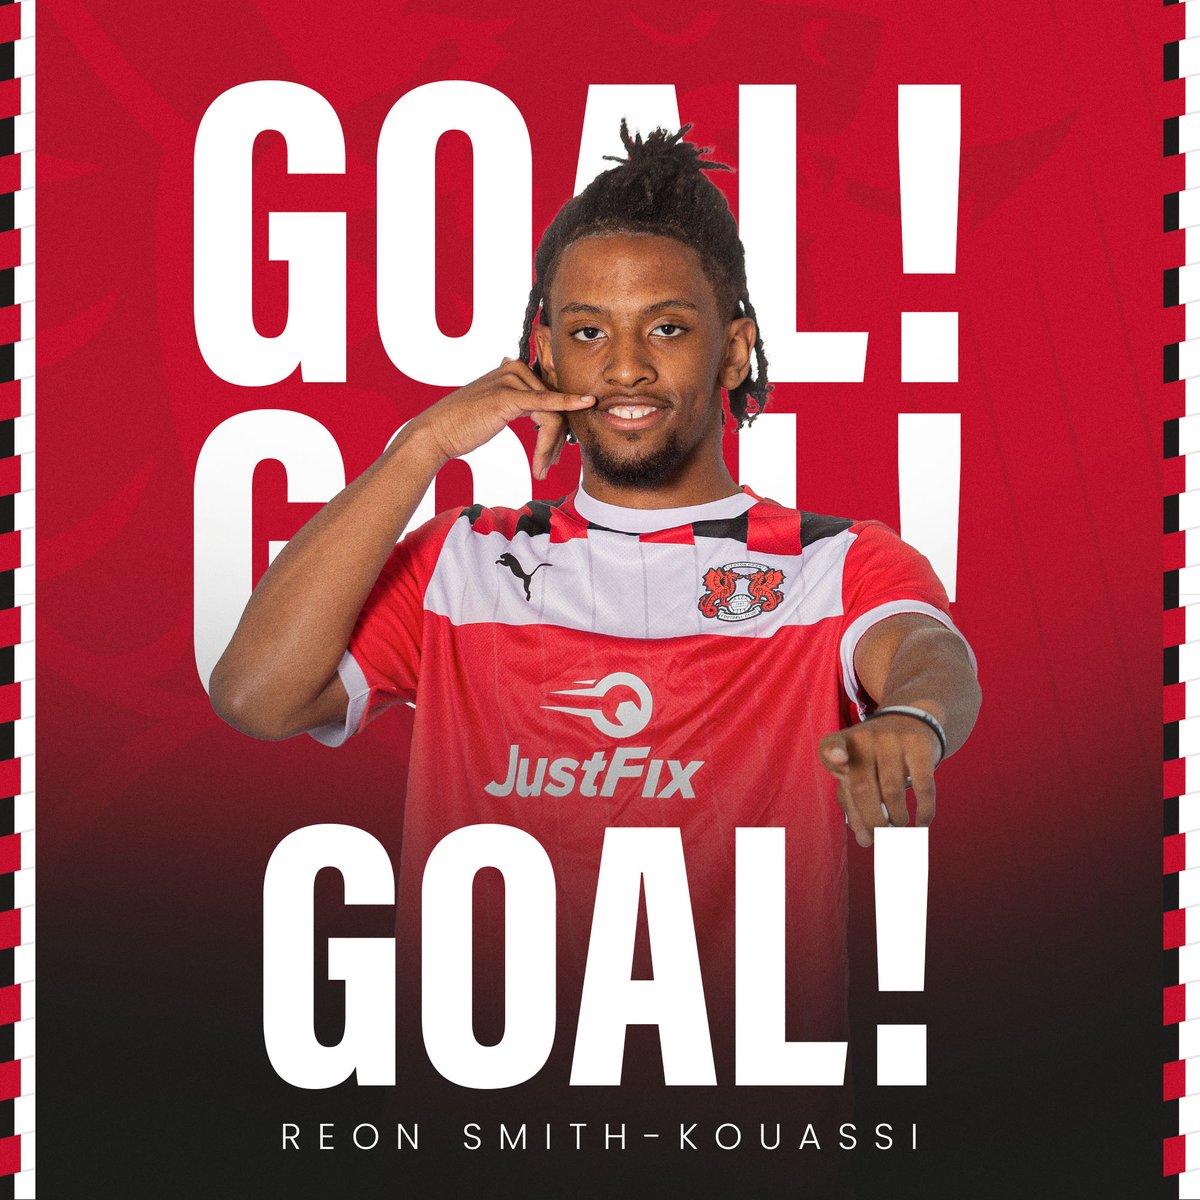 36' WHAT A FINISH REON!!!! #ARS 0-2 #LOFC